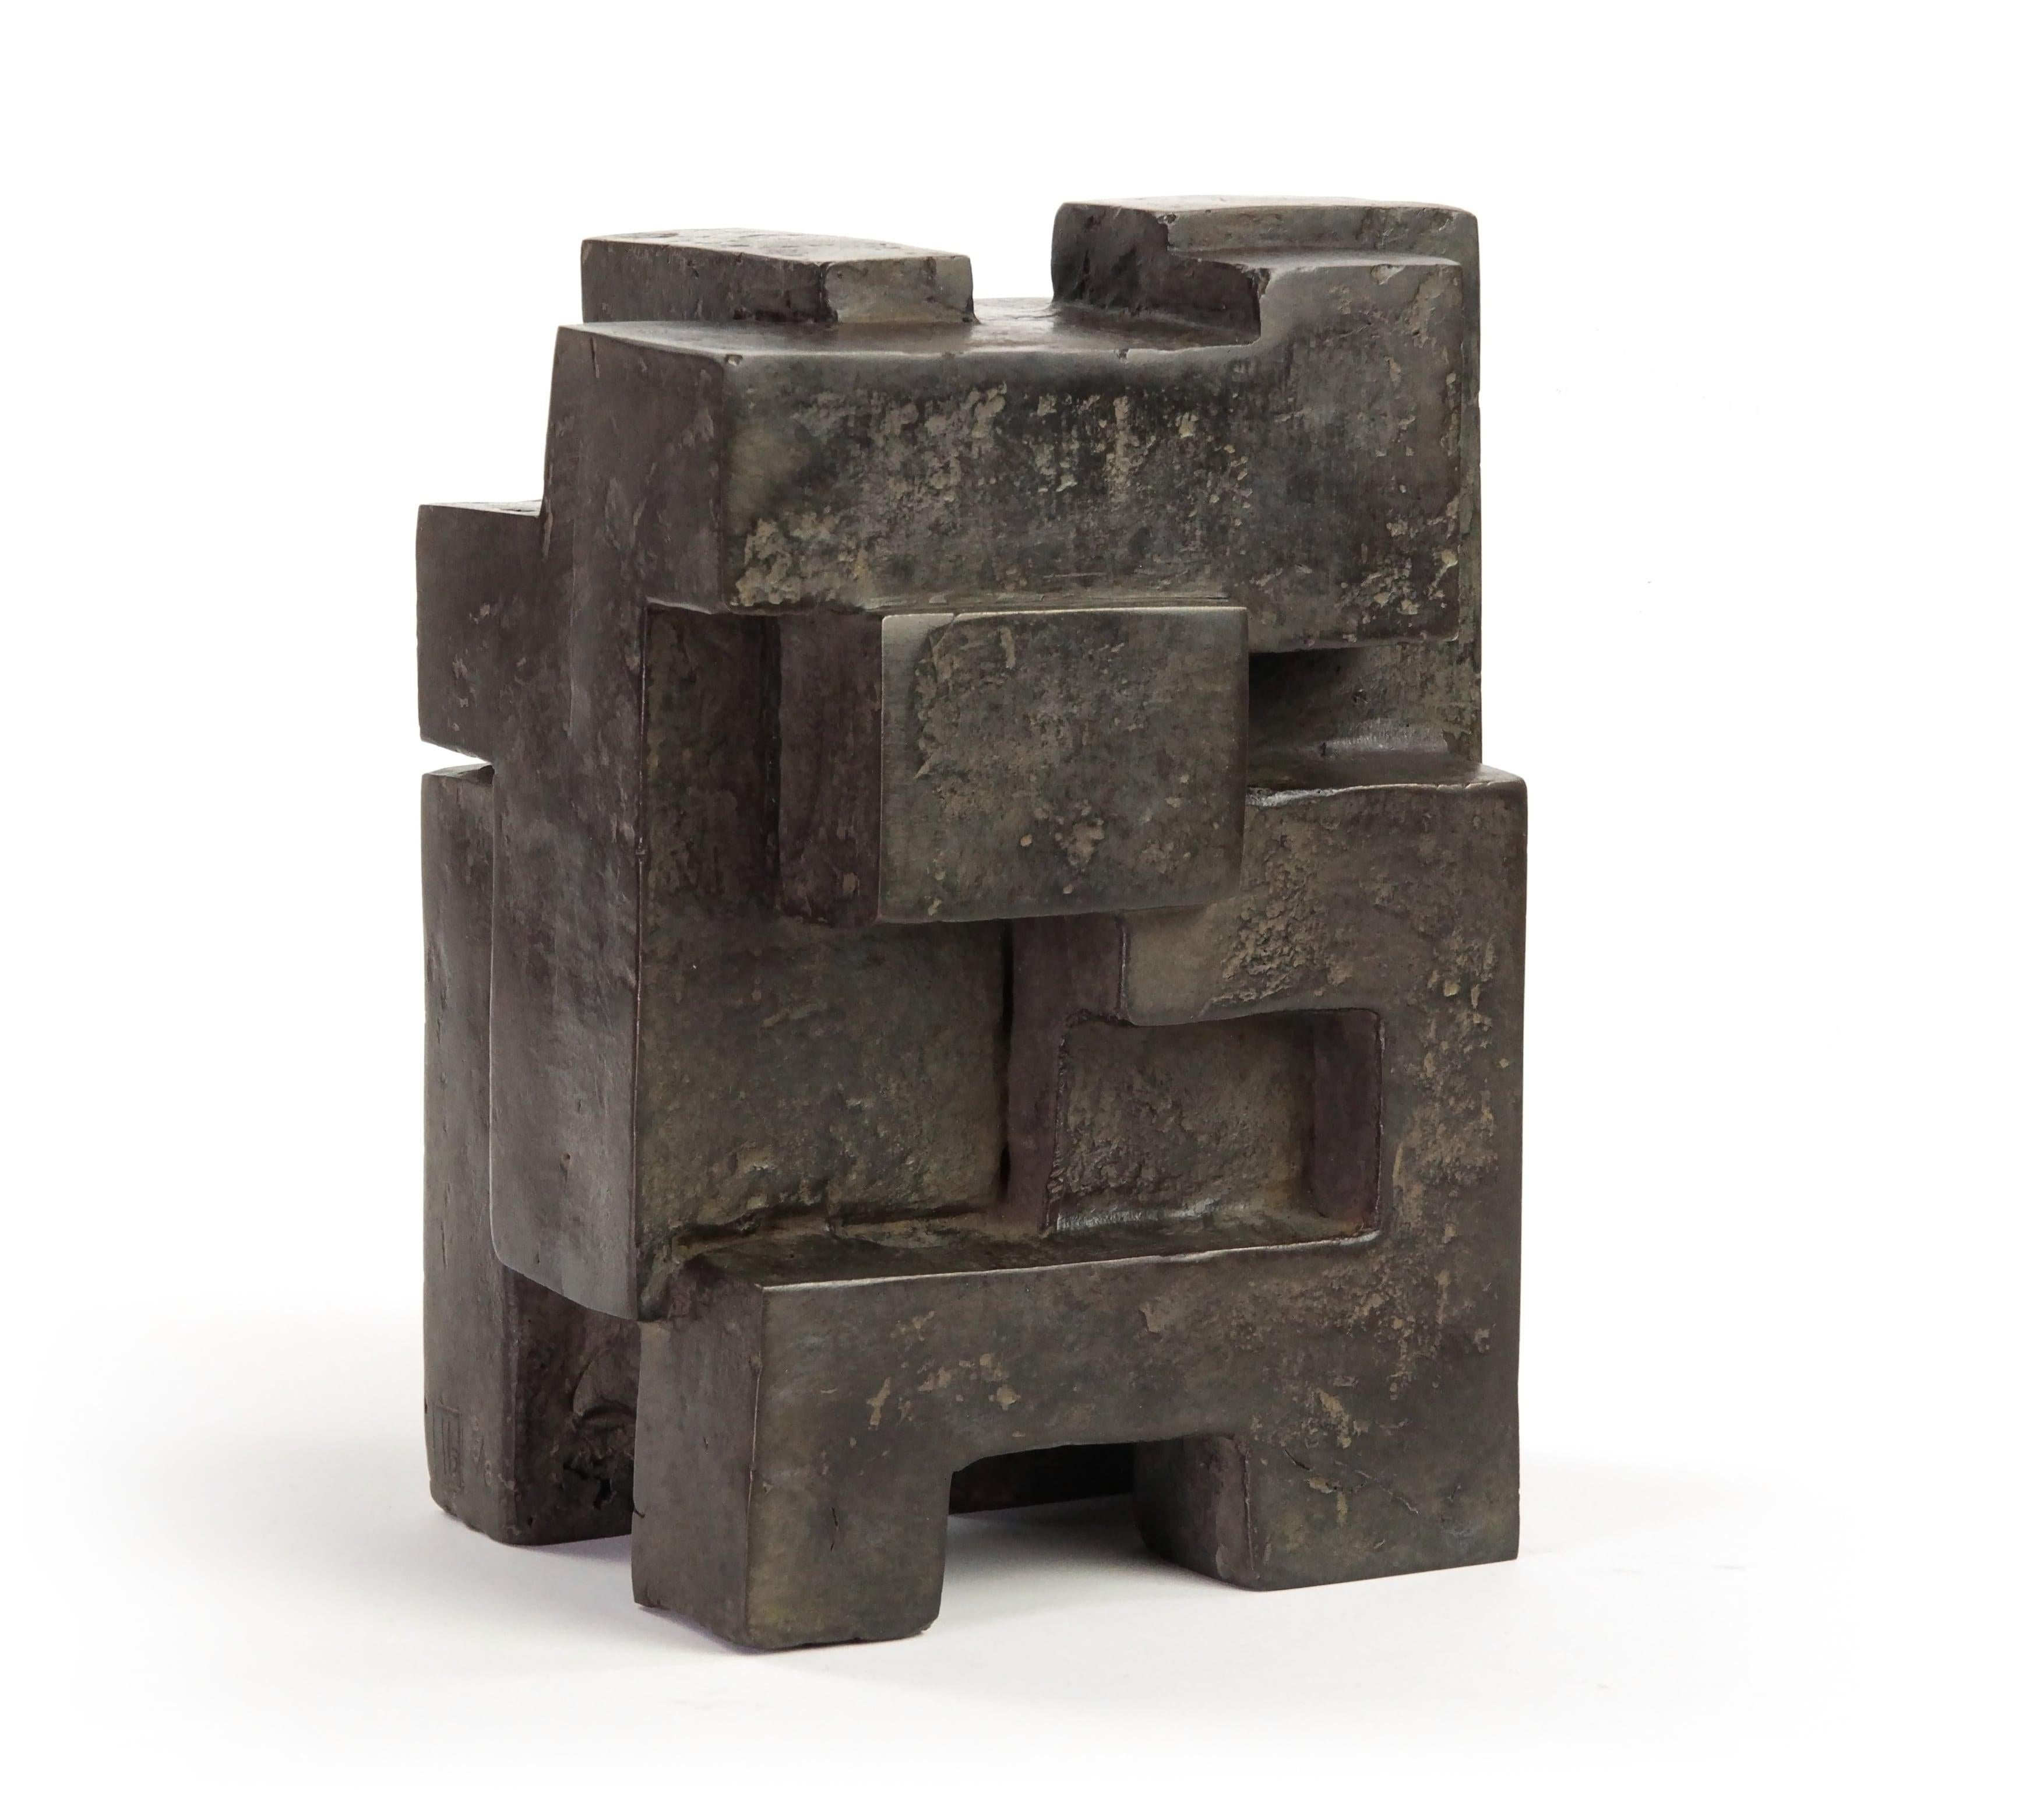 Block III is a bronze sculpture by French contemporary artist Delphine Brabant from the series "Architecture".
20 cm × 14 cm × 10 cm. Limited edition of 8 and 4 artist's proofs.
In this series, the artist designs geometric shapes bringing together